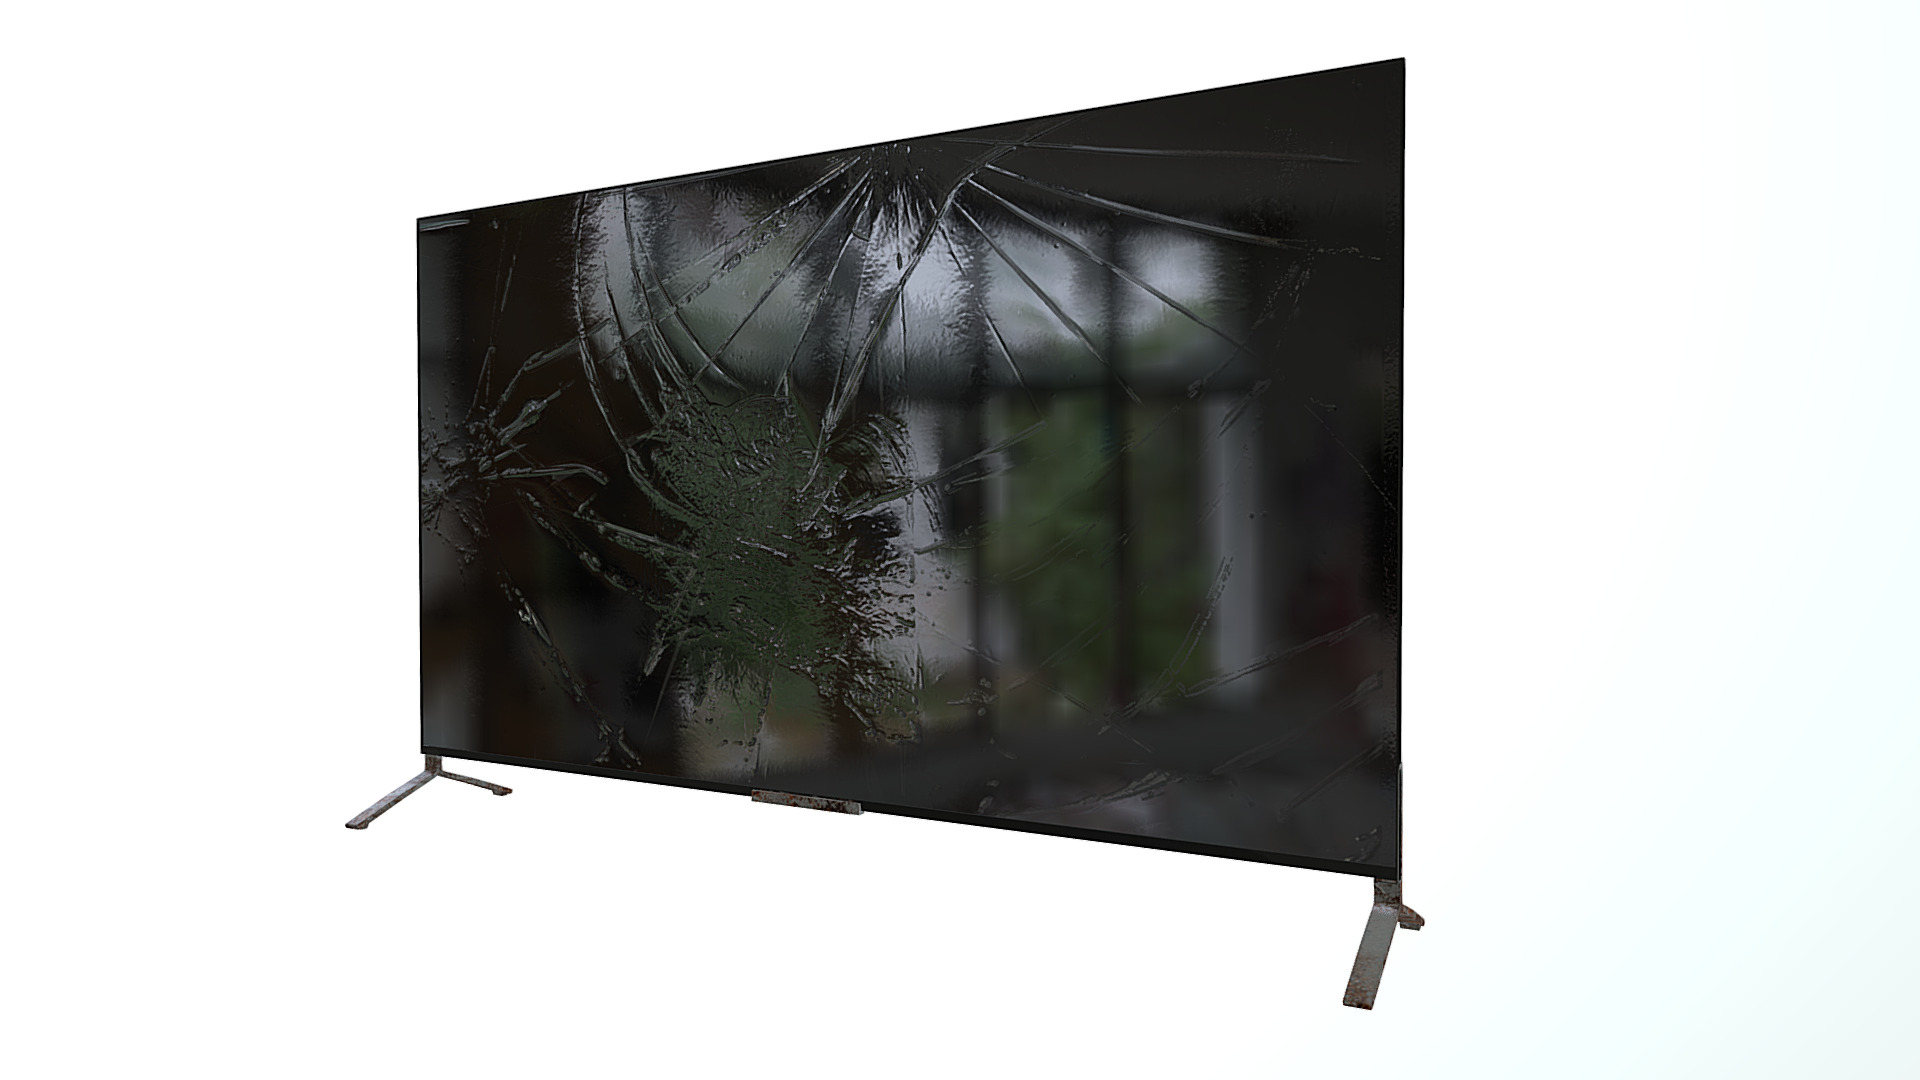 3D model Broken TV - This is a 3D model of the Broken TV. The 3D model is about a black umbrella with a black cover.